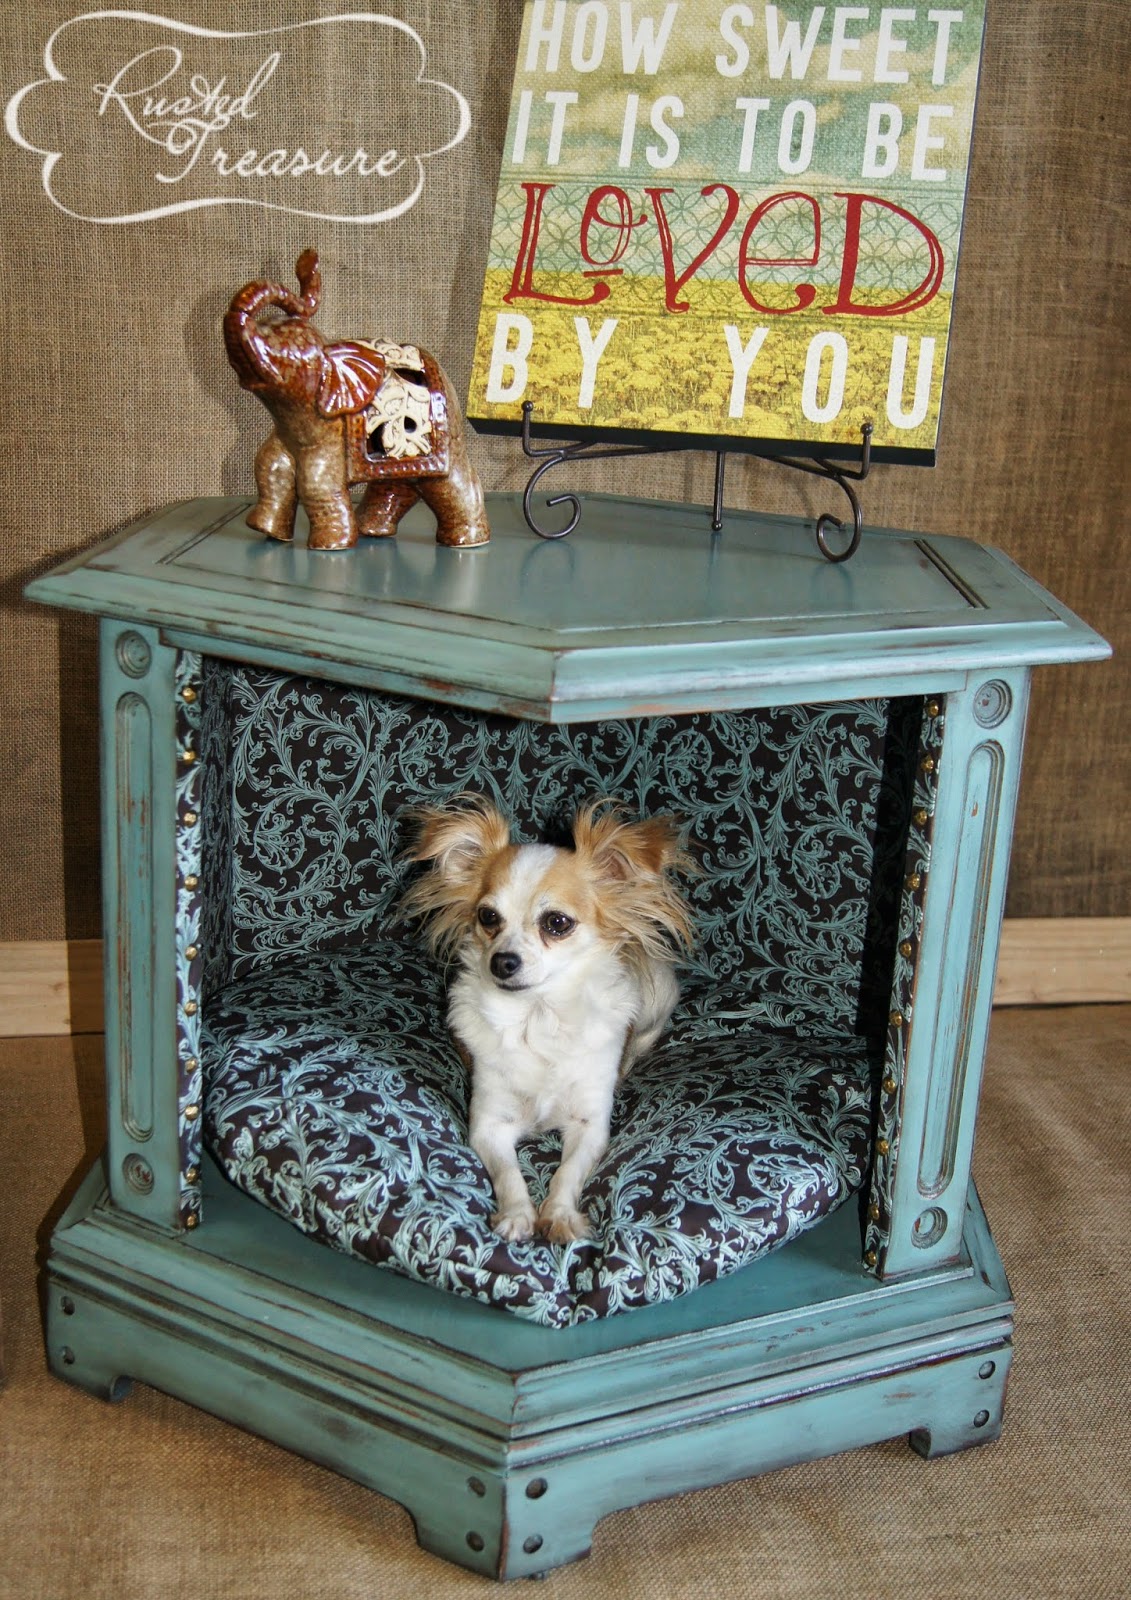 royal-pet-bed-from-old-table-dip-feed-3